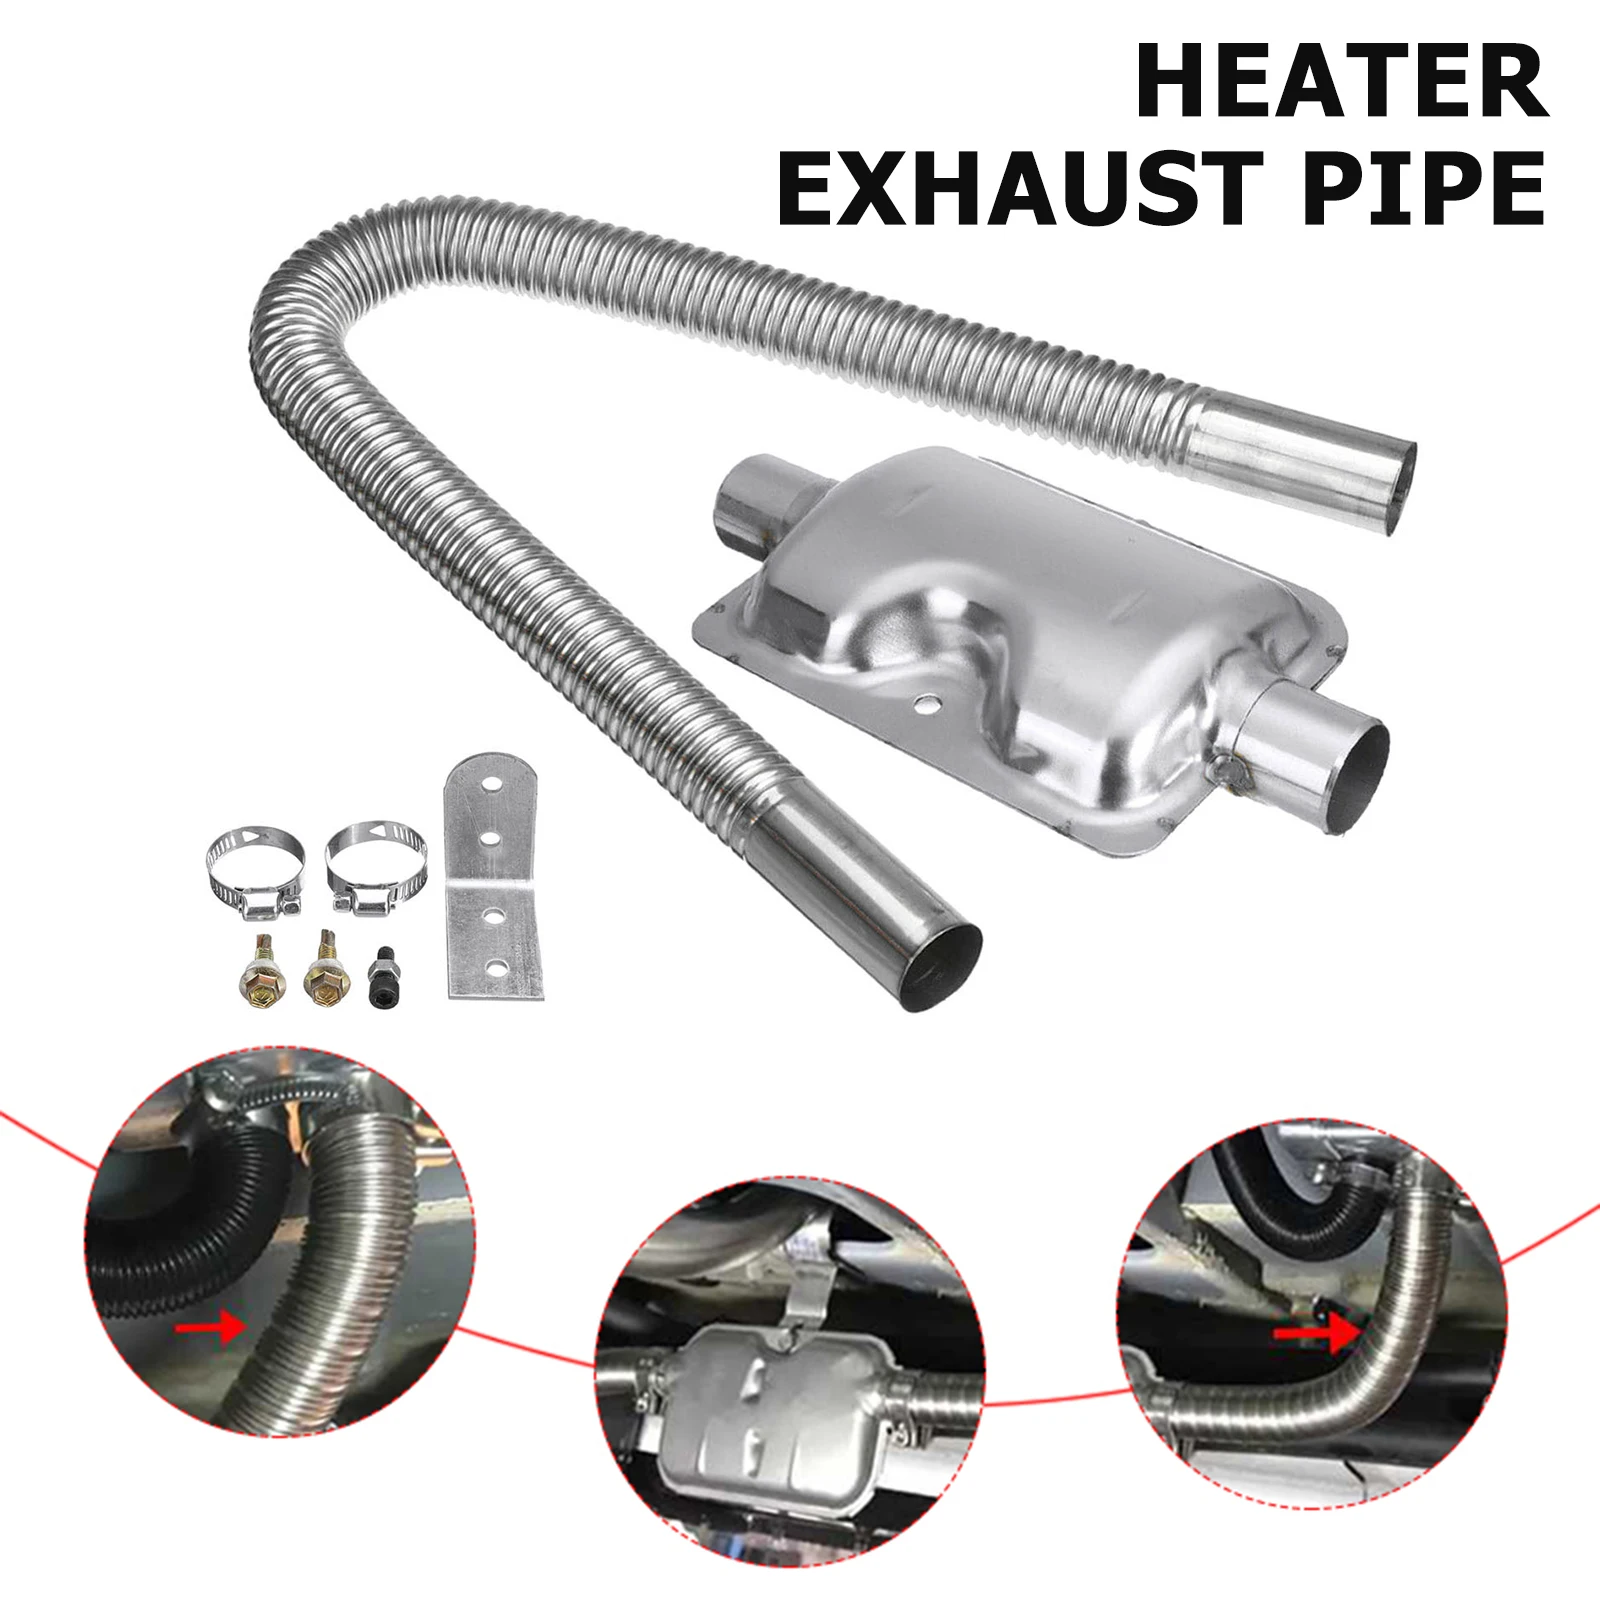 Parking Heater Stainless Steel Exhaust Pipe Flexible Car Exhaust Pipe, Also Suitable For Kitchen Drain (d: 2.5cm, 200cm)